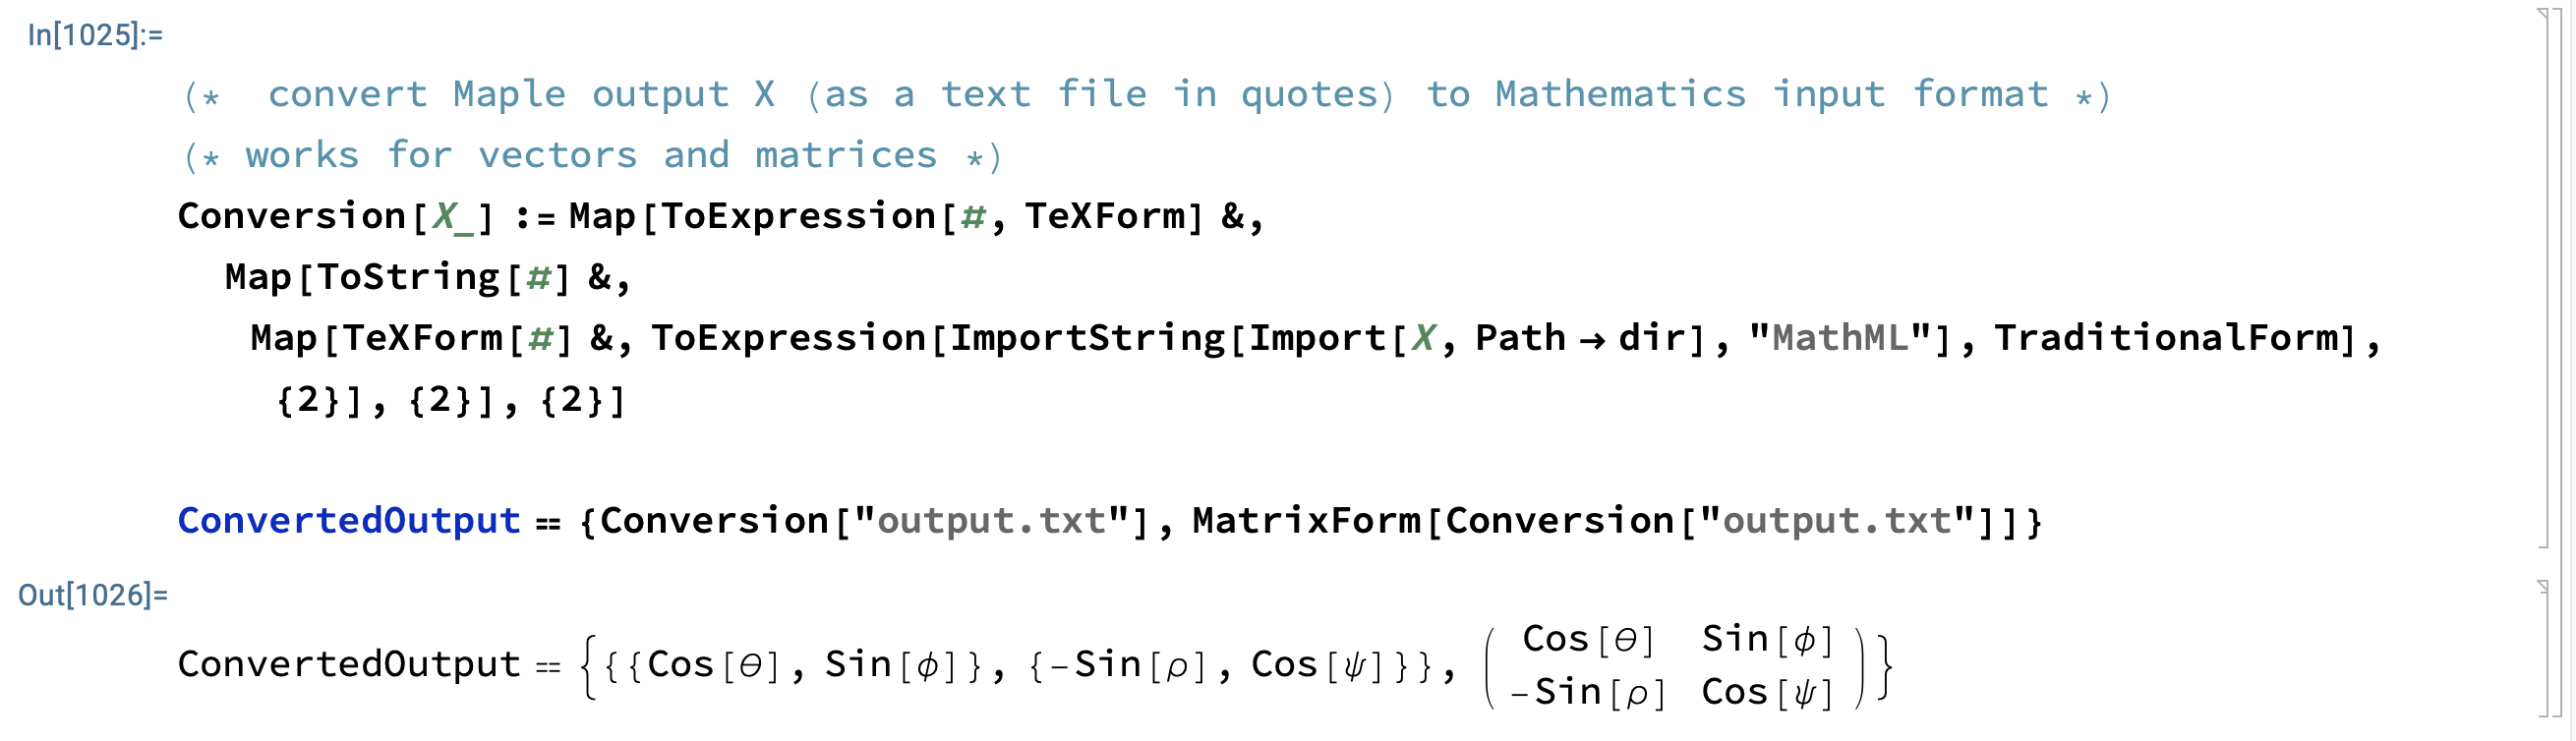 A General Conversion of Maple Output (expression, vector, or matrix) to Mathematica Input